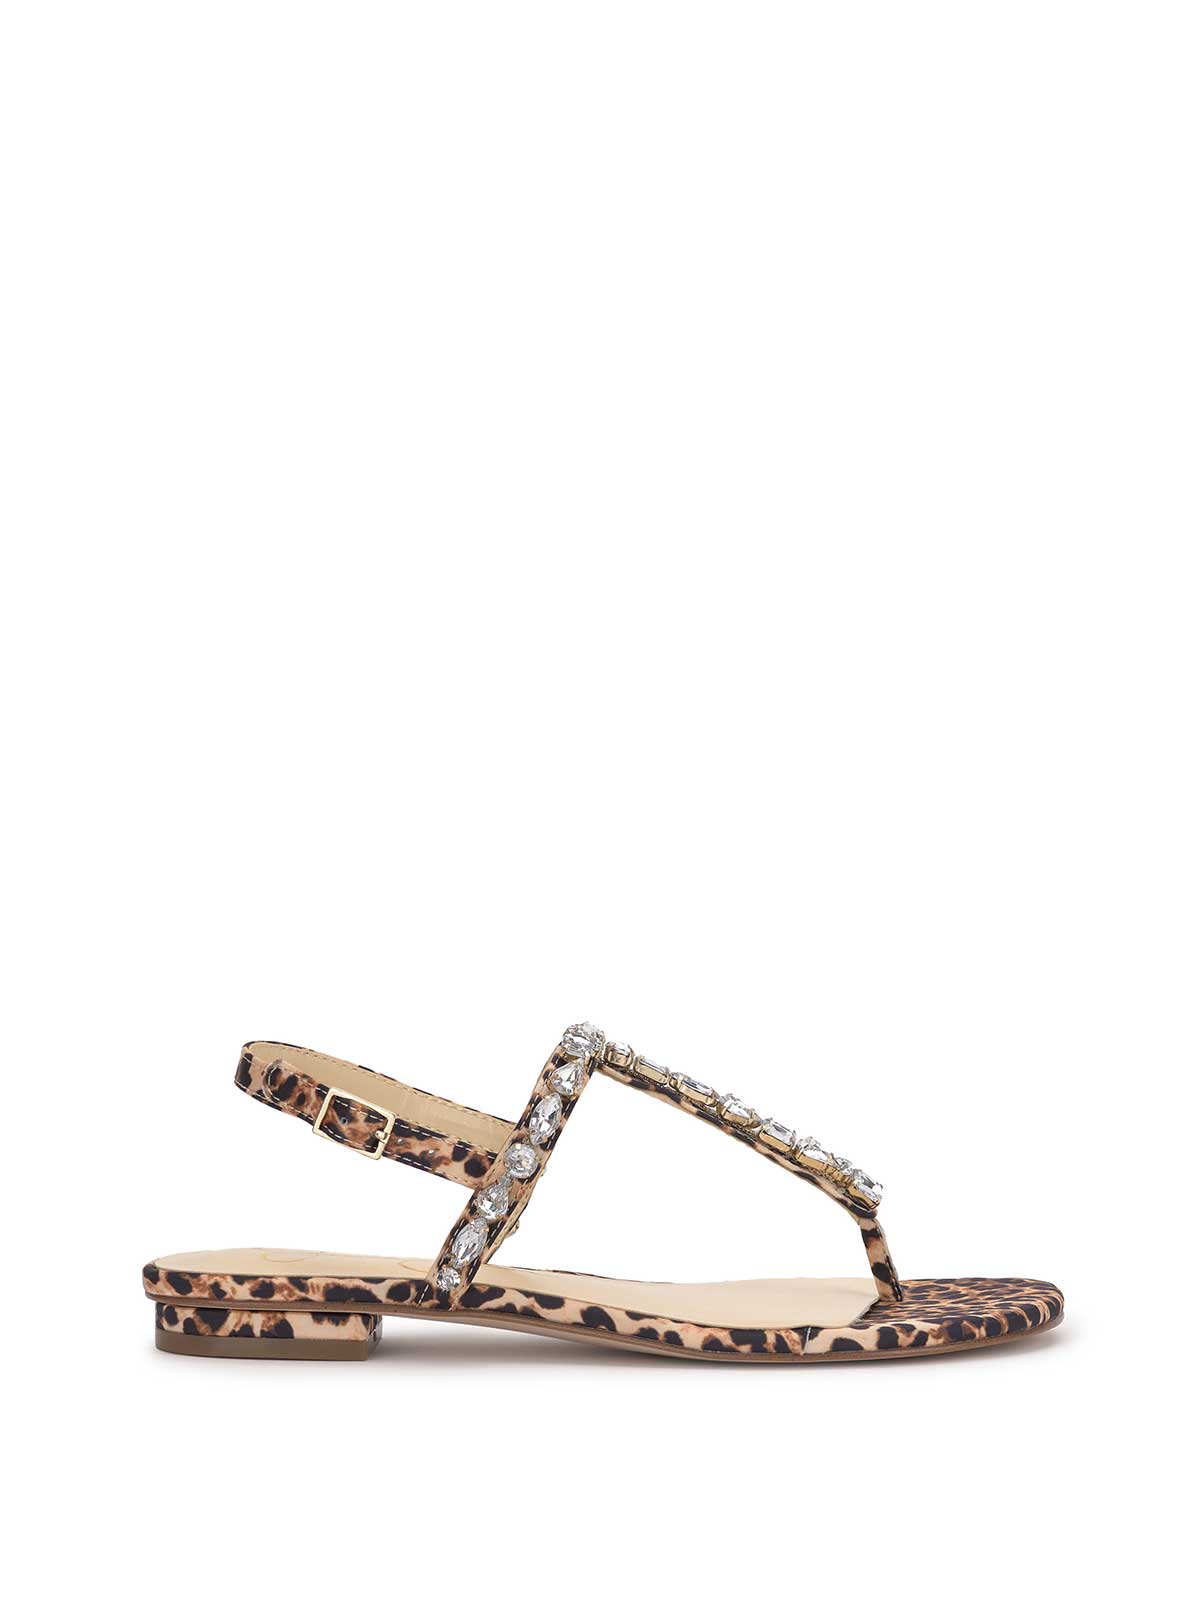 Sanctuary Shoes | Sway Tan Leopard Fabric Strappy Flat Sandals | Style  Representative